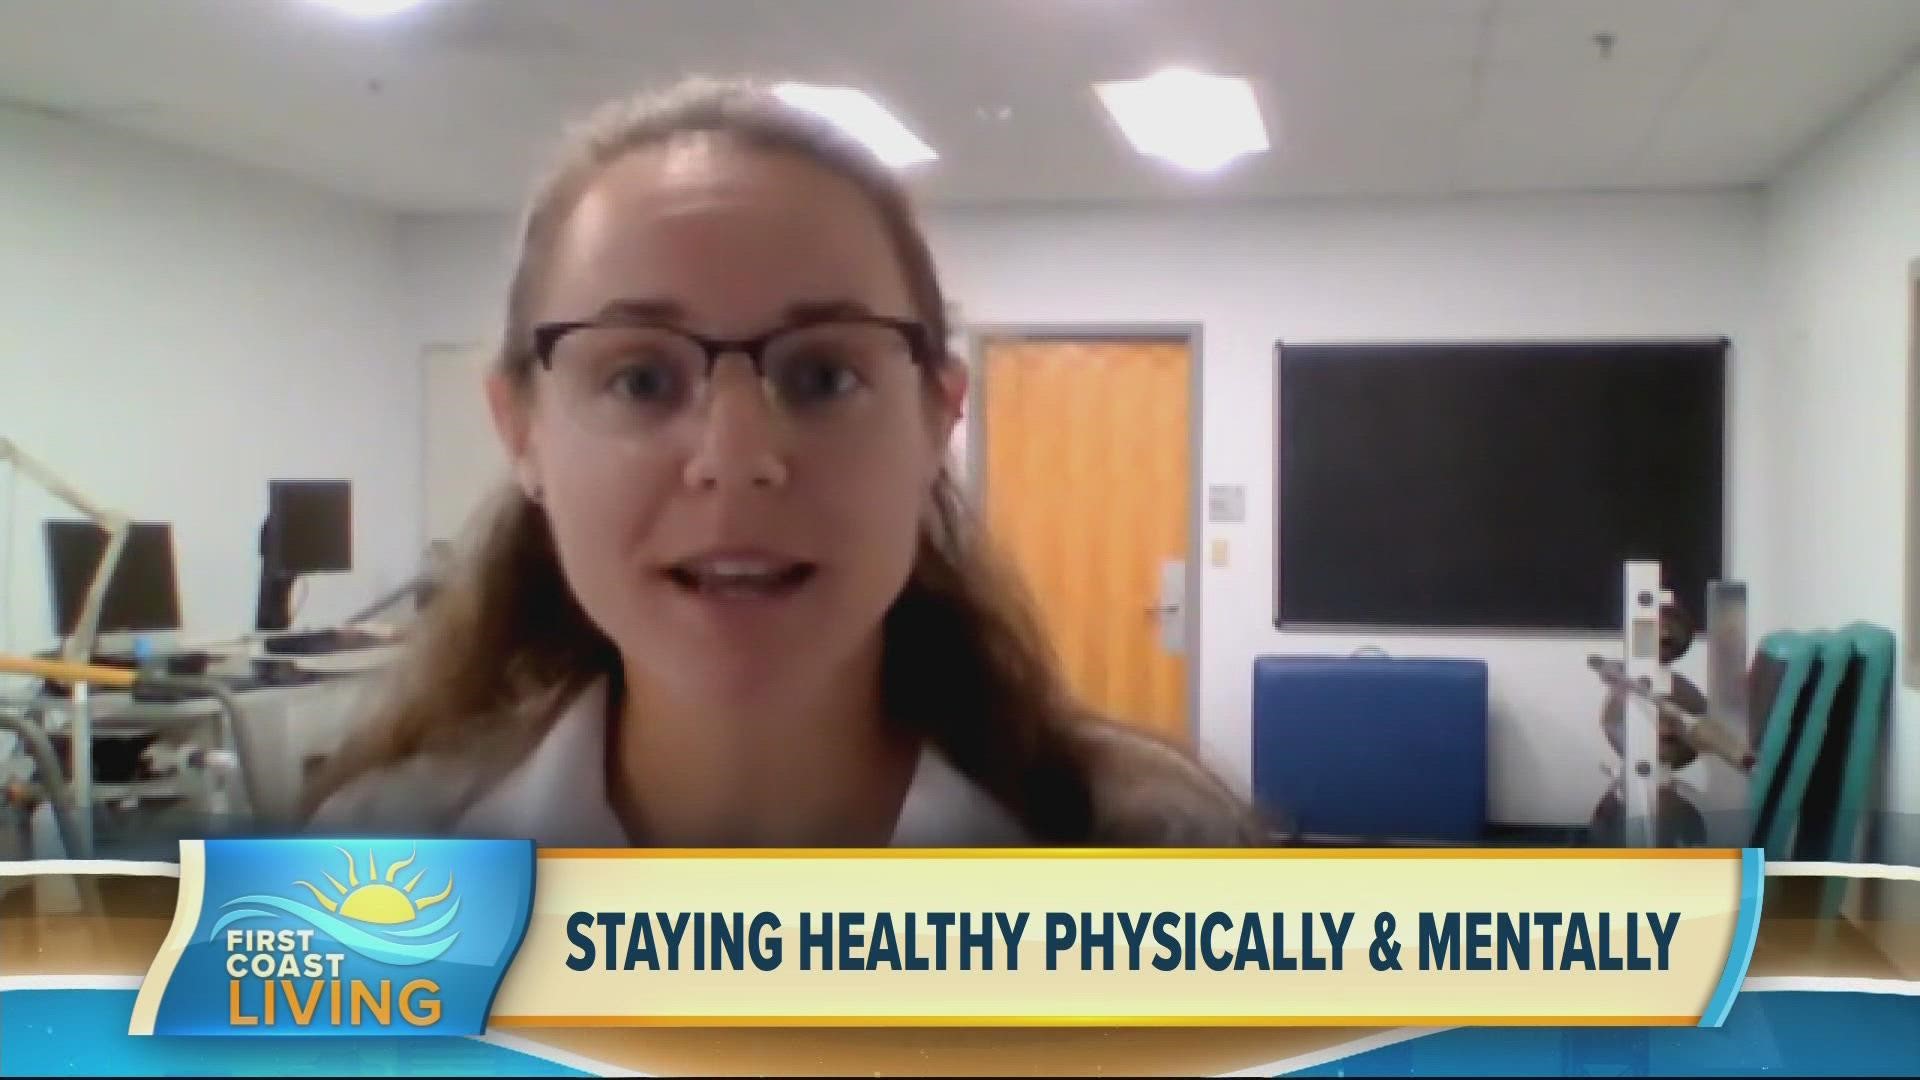 Looking to get more active this year? UNF Assistant Professor, Dr. Lindsay Toth shares the benefits of movement and simple ways we can get started today.